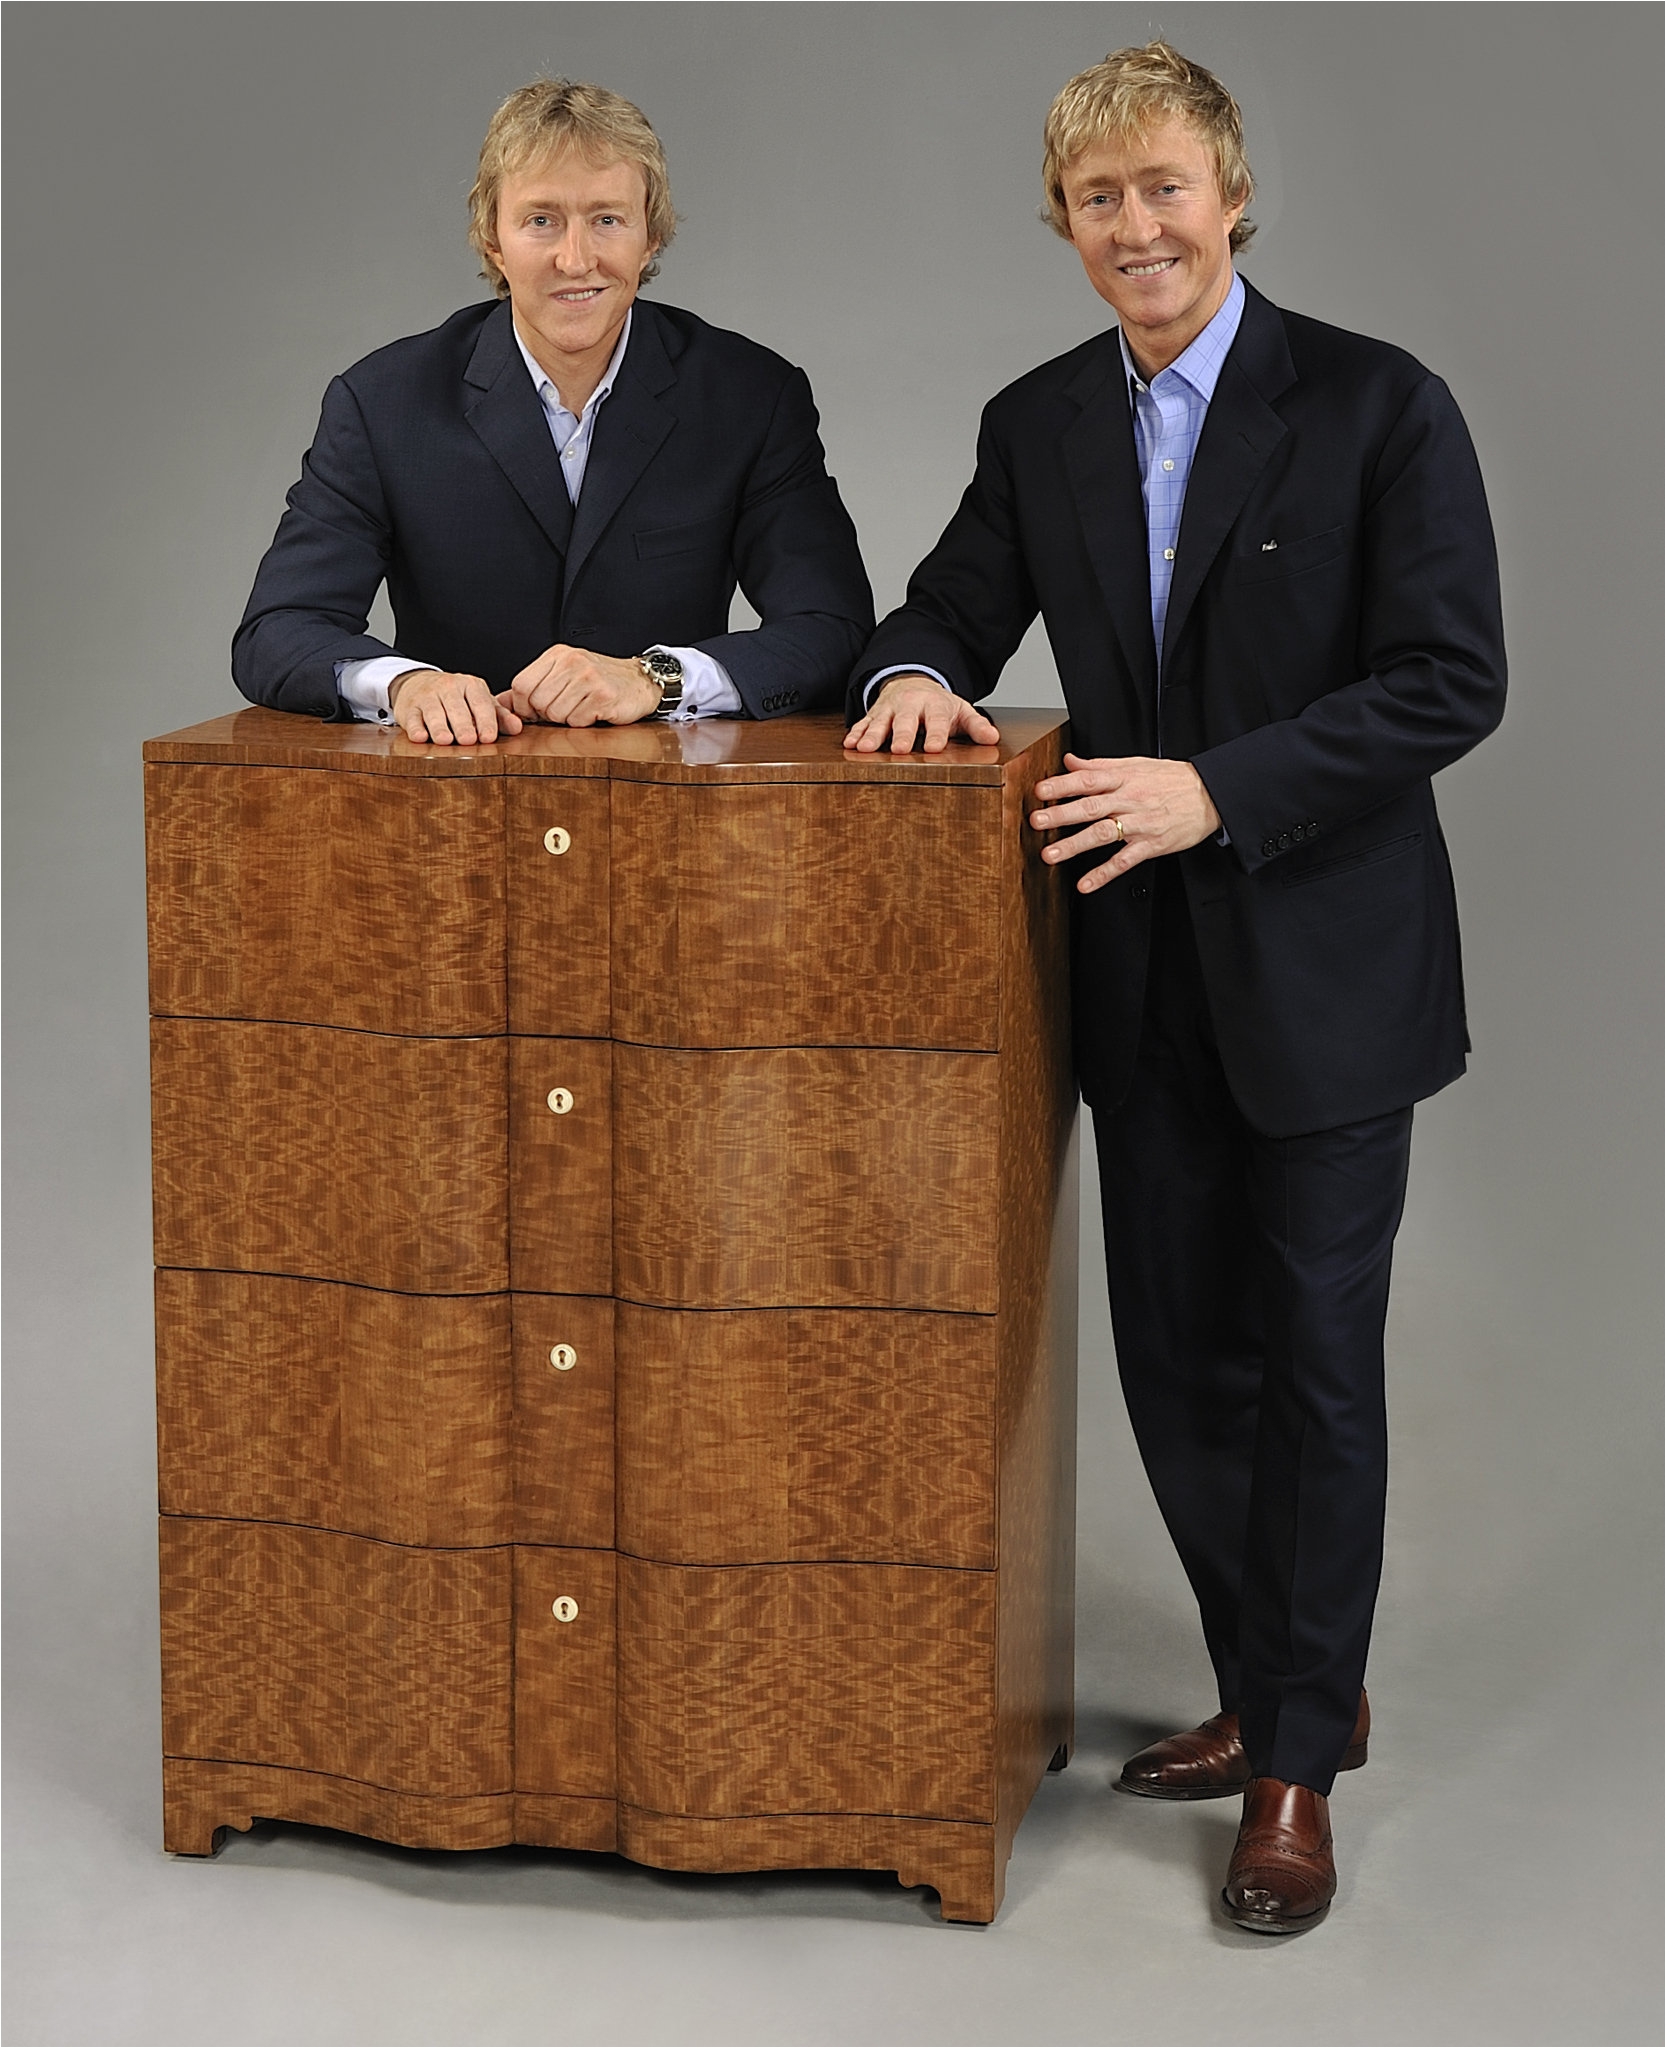 keno brothers give thumbs up to mixing old and new furniture in todays rental spaces cleveland com